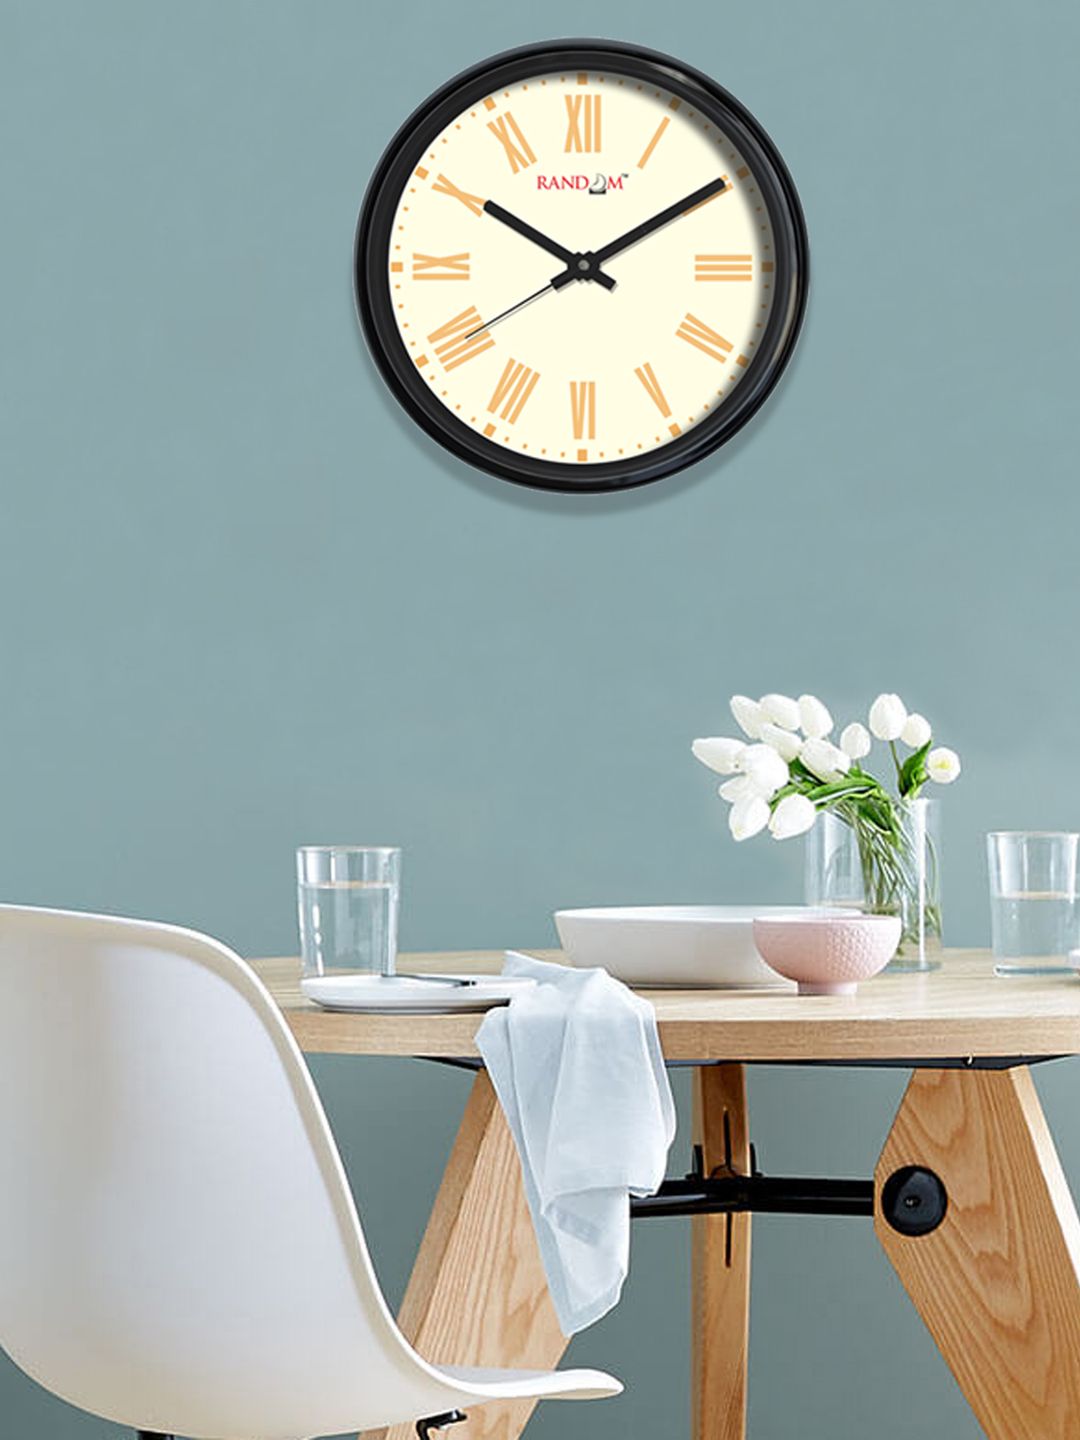 RANDOM Yellow Round Solid Analogue Wall Clock Price in India